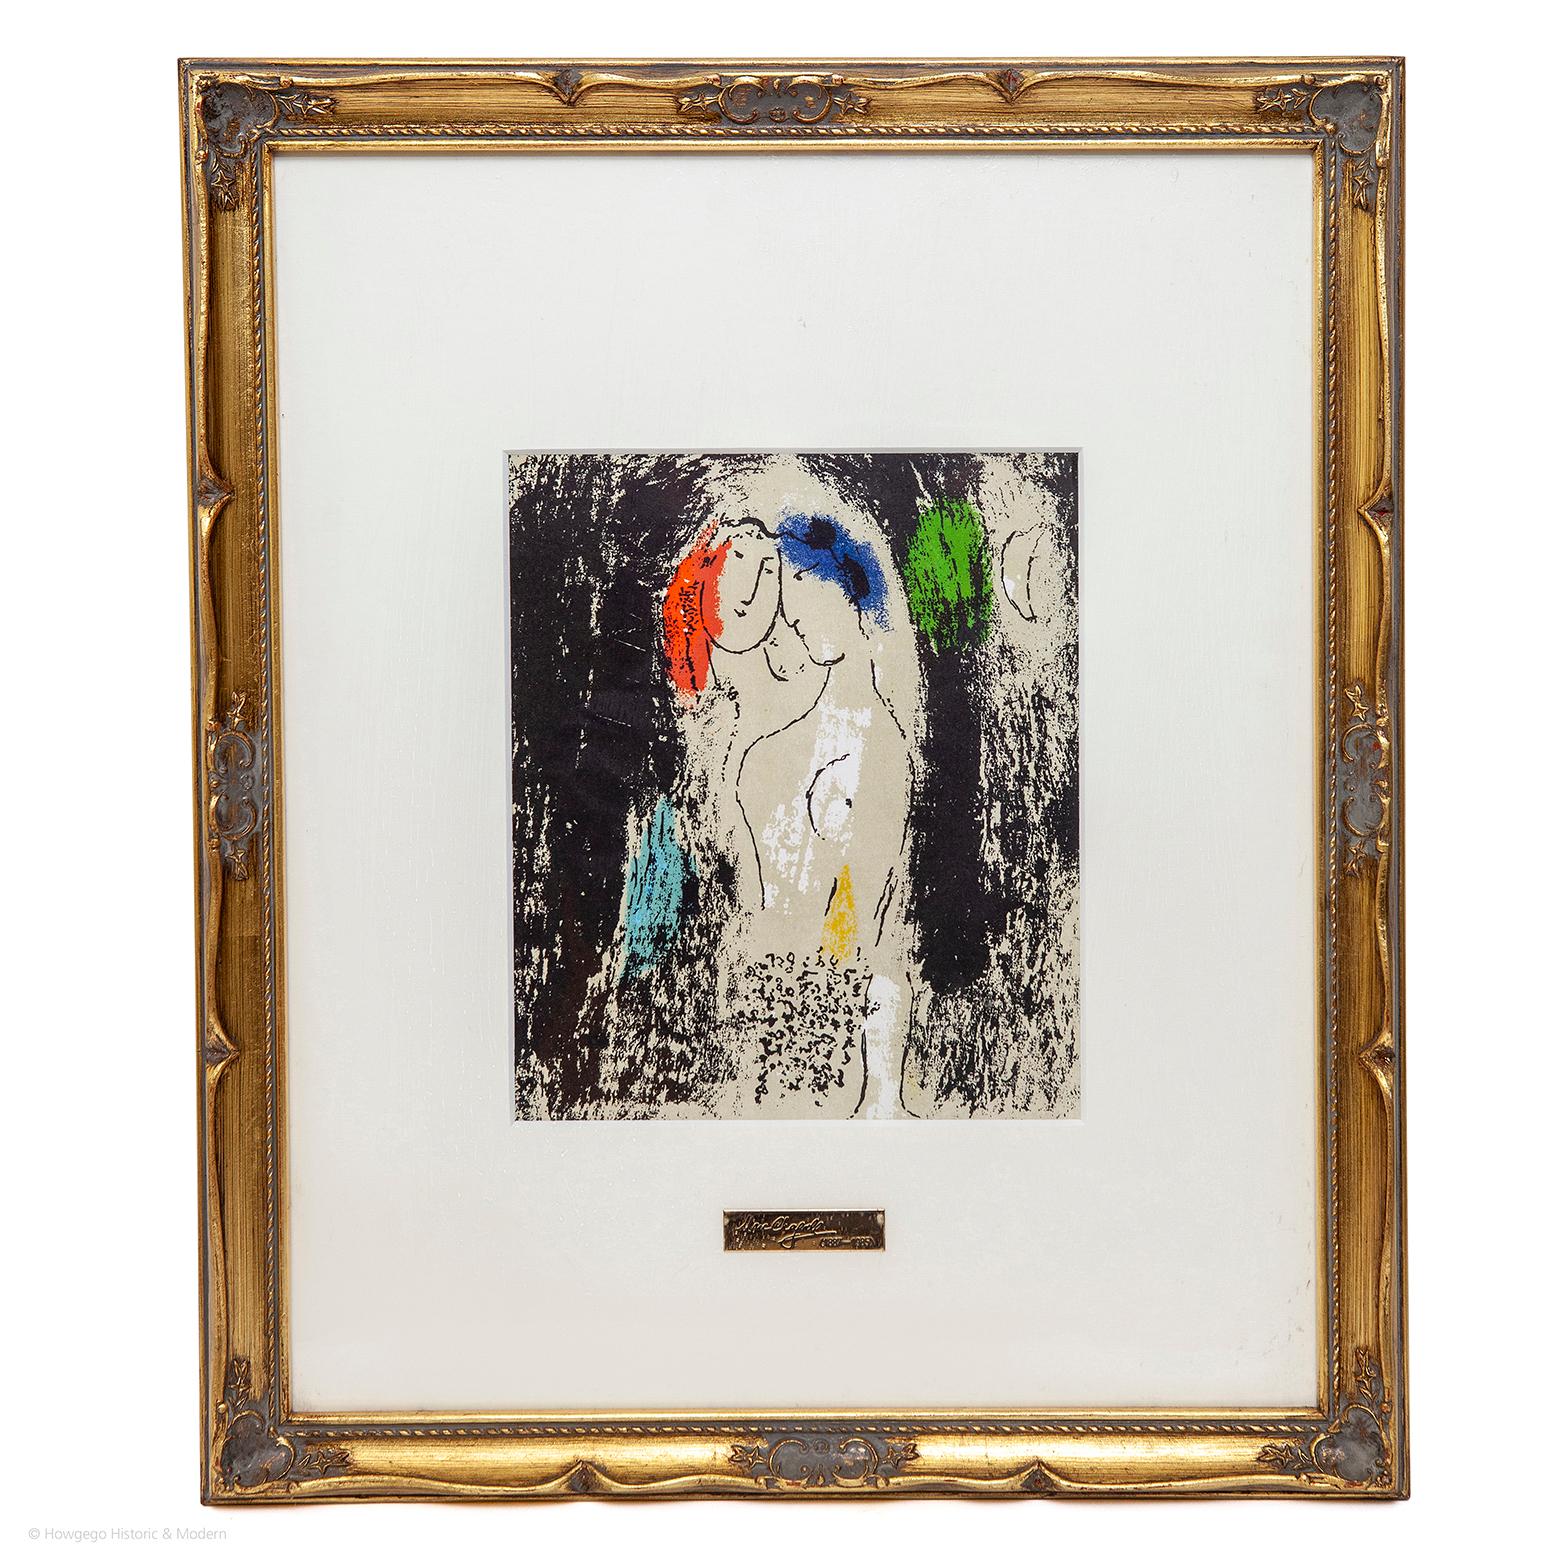 L'inspire Inspiration Self Portrait Chagall Lithographe no398 In Good Condition For Sale In BUNGAY, SUFFOLK